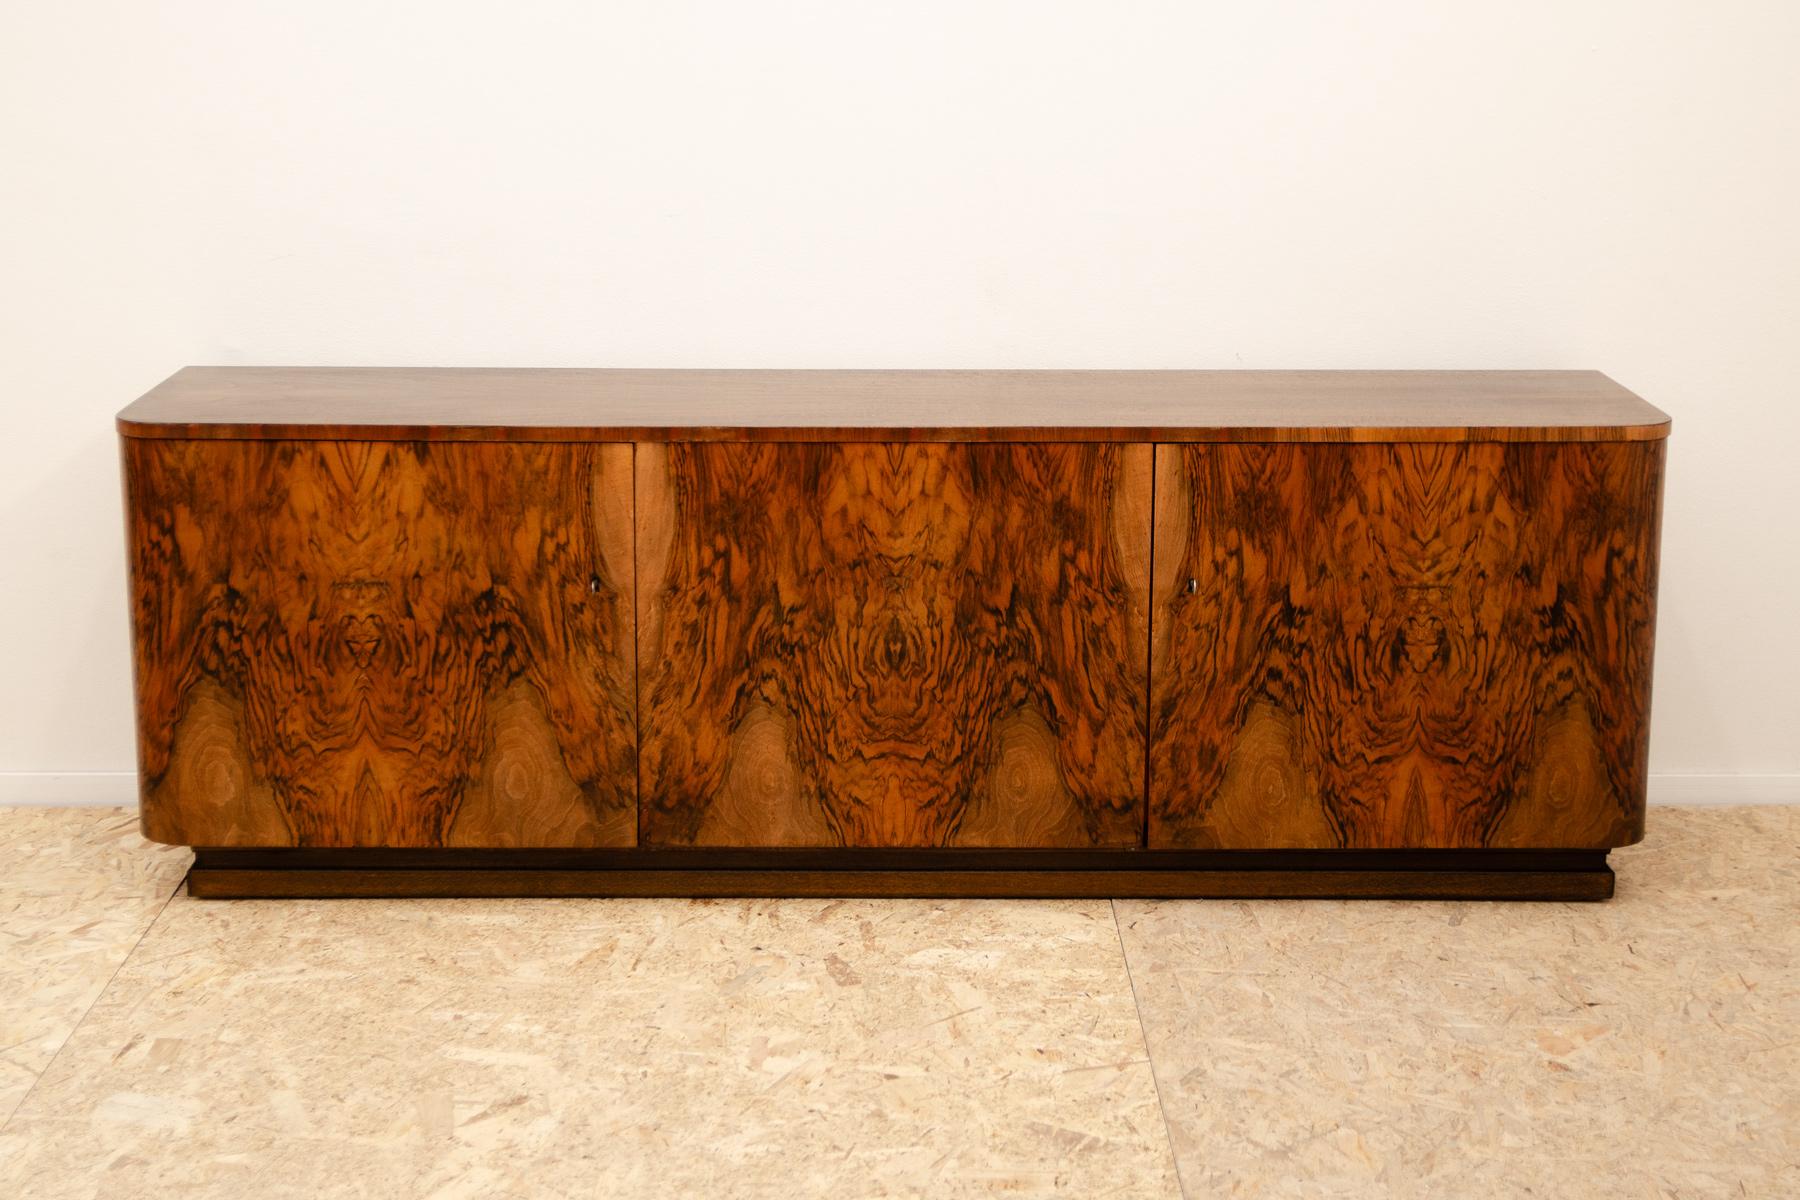 This huge ART DECO sideboard was made in the former Czechoslovakia in the 1930s.
The piece has a beautiful rounded shapes, solid wooden plinth on the bottom.
It is made of walnut wood and veneered with a beautiful walnut veneer.
It’s an example of